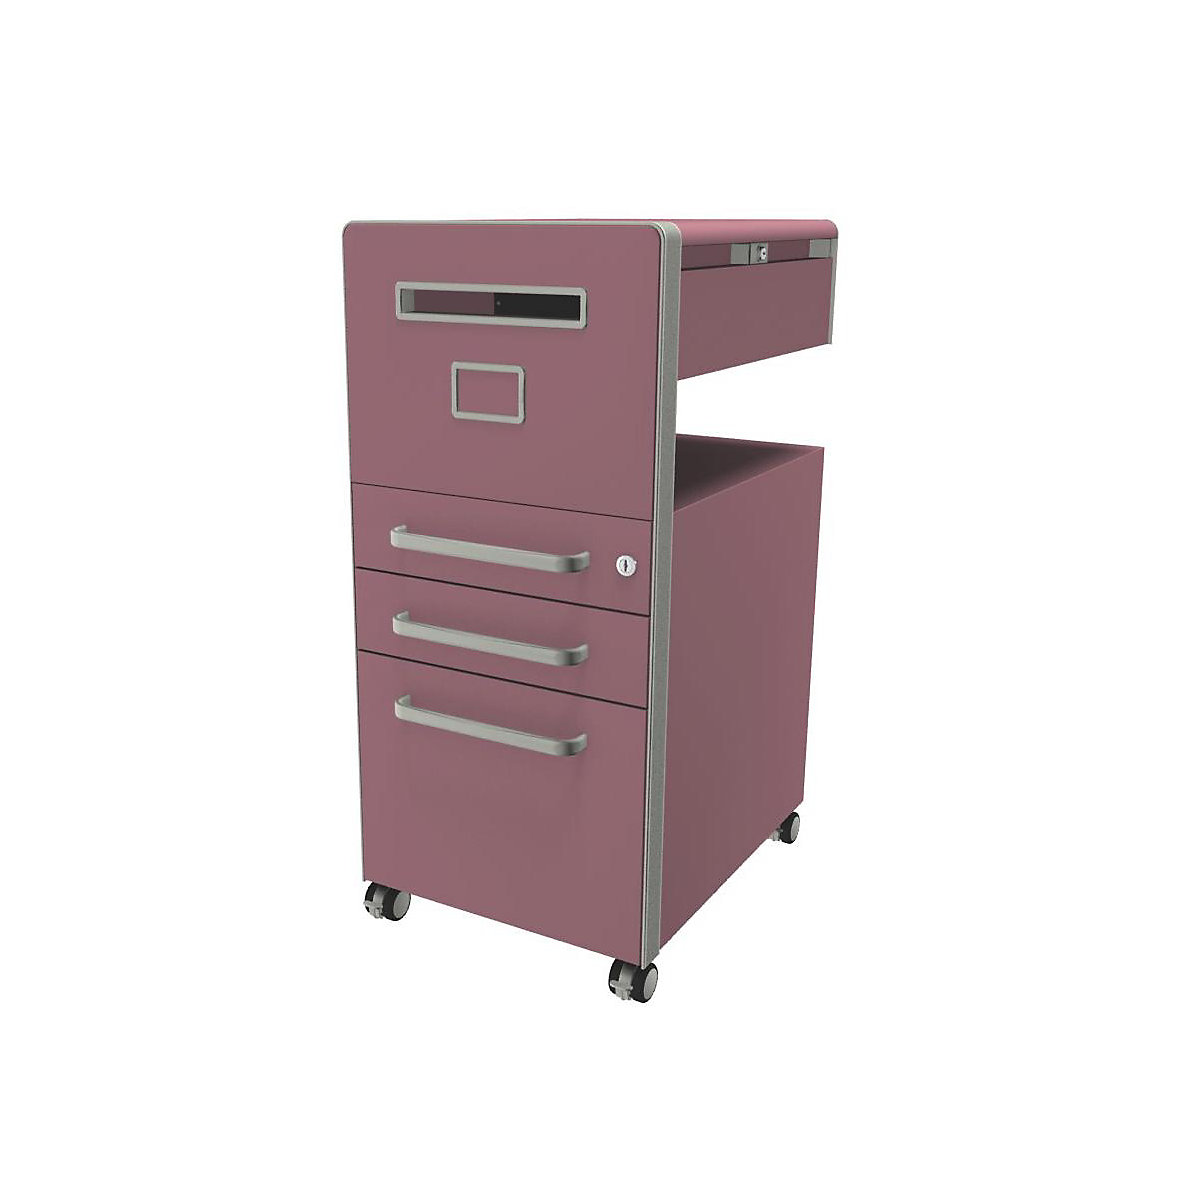 Bite™ pedestal furniture, with 1 whiteboard, opens on the left side – BISLEY, with 2 universal drawers, 1 suspension file drawer, pink-12